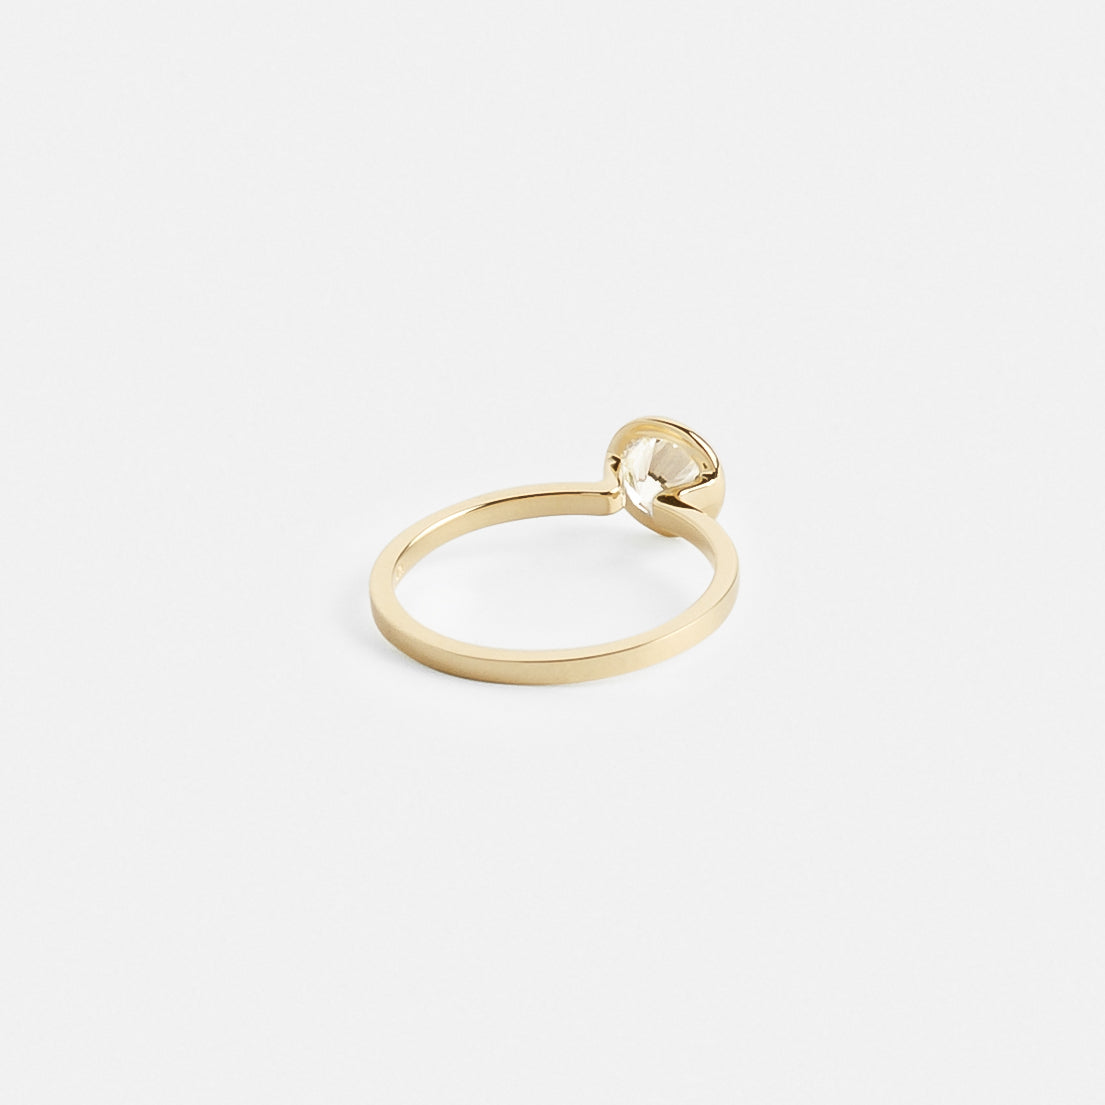 Mana Minimalist Ring in 14k Gold set with a 0.8ct  round brilliant cut natural diamond By SHW Fine Jewelry NYC